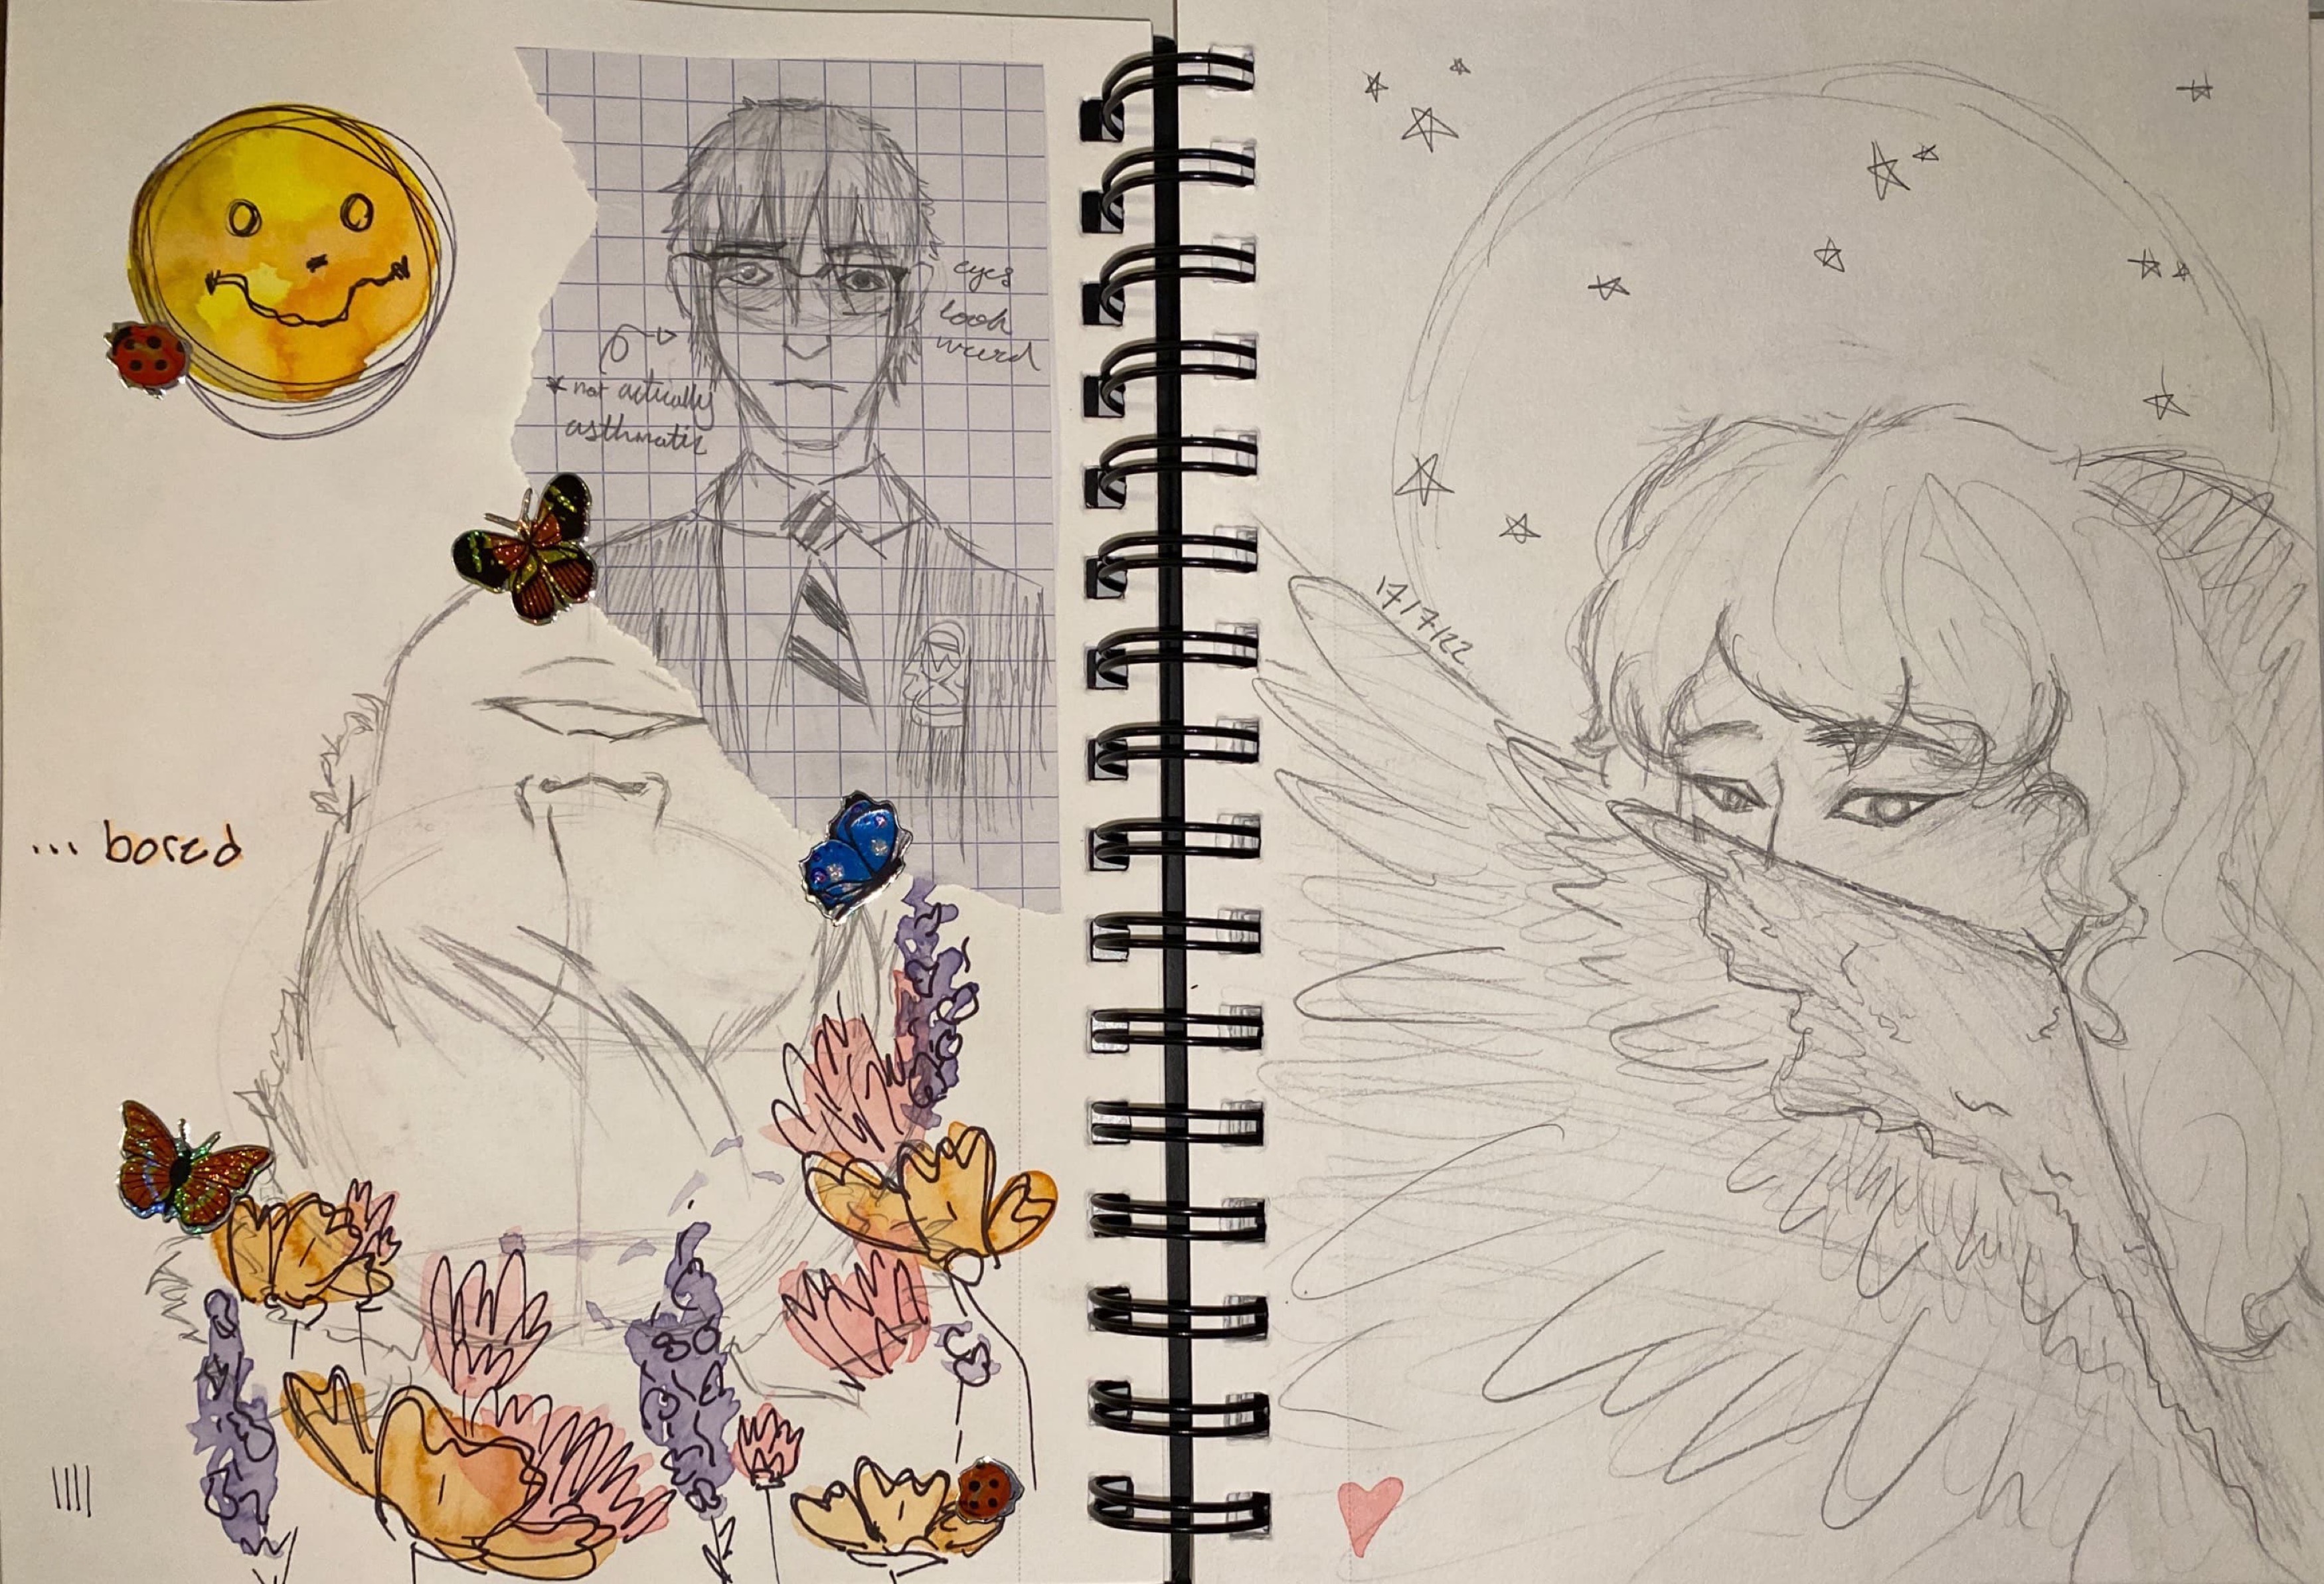 2 pages: a series of drawings including mikey way in the im not okay music video, a smiley face, an upside down unfinished face and some watercolour flowers, and an angel